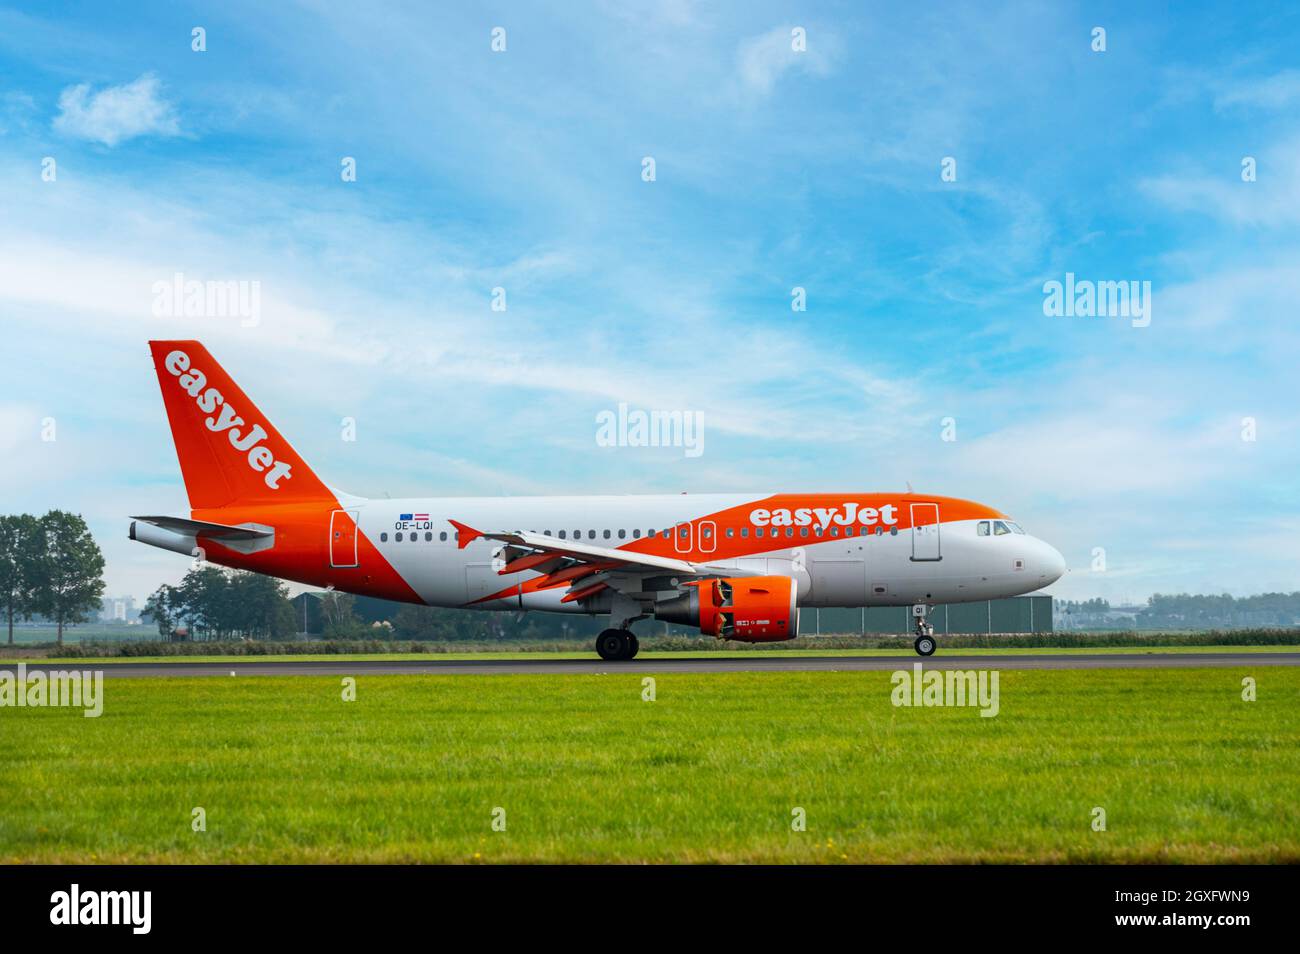 Easyjet Airbus A319 on the runway Stock Photo